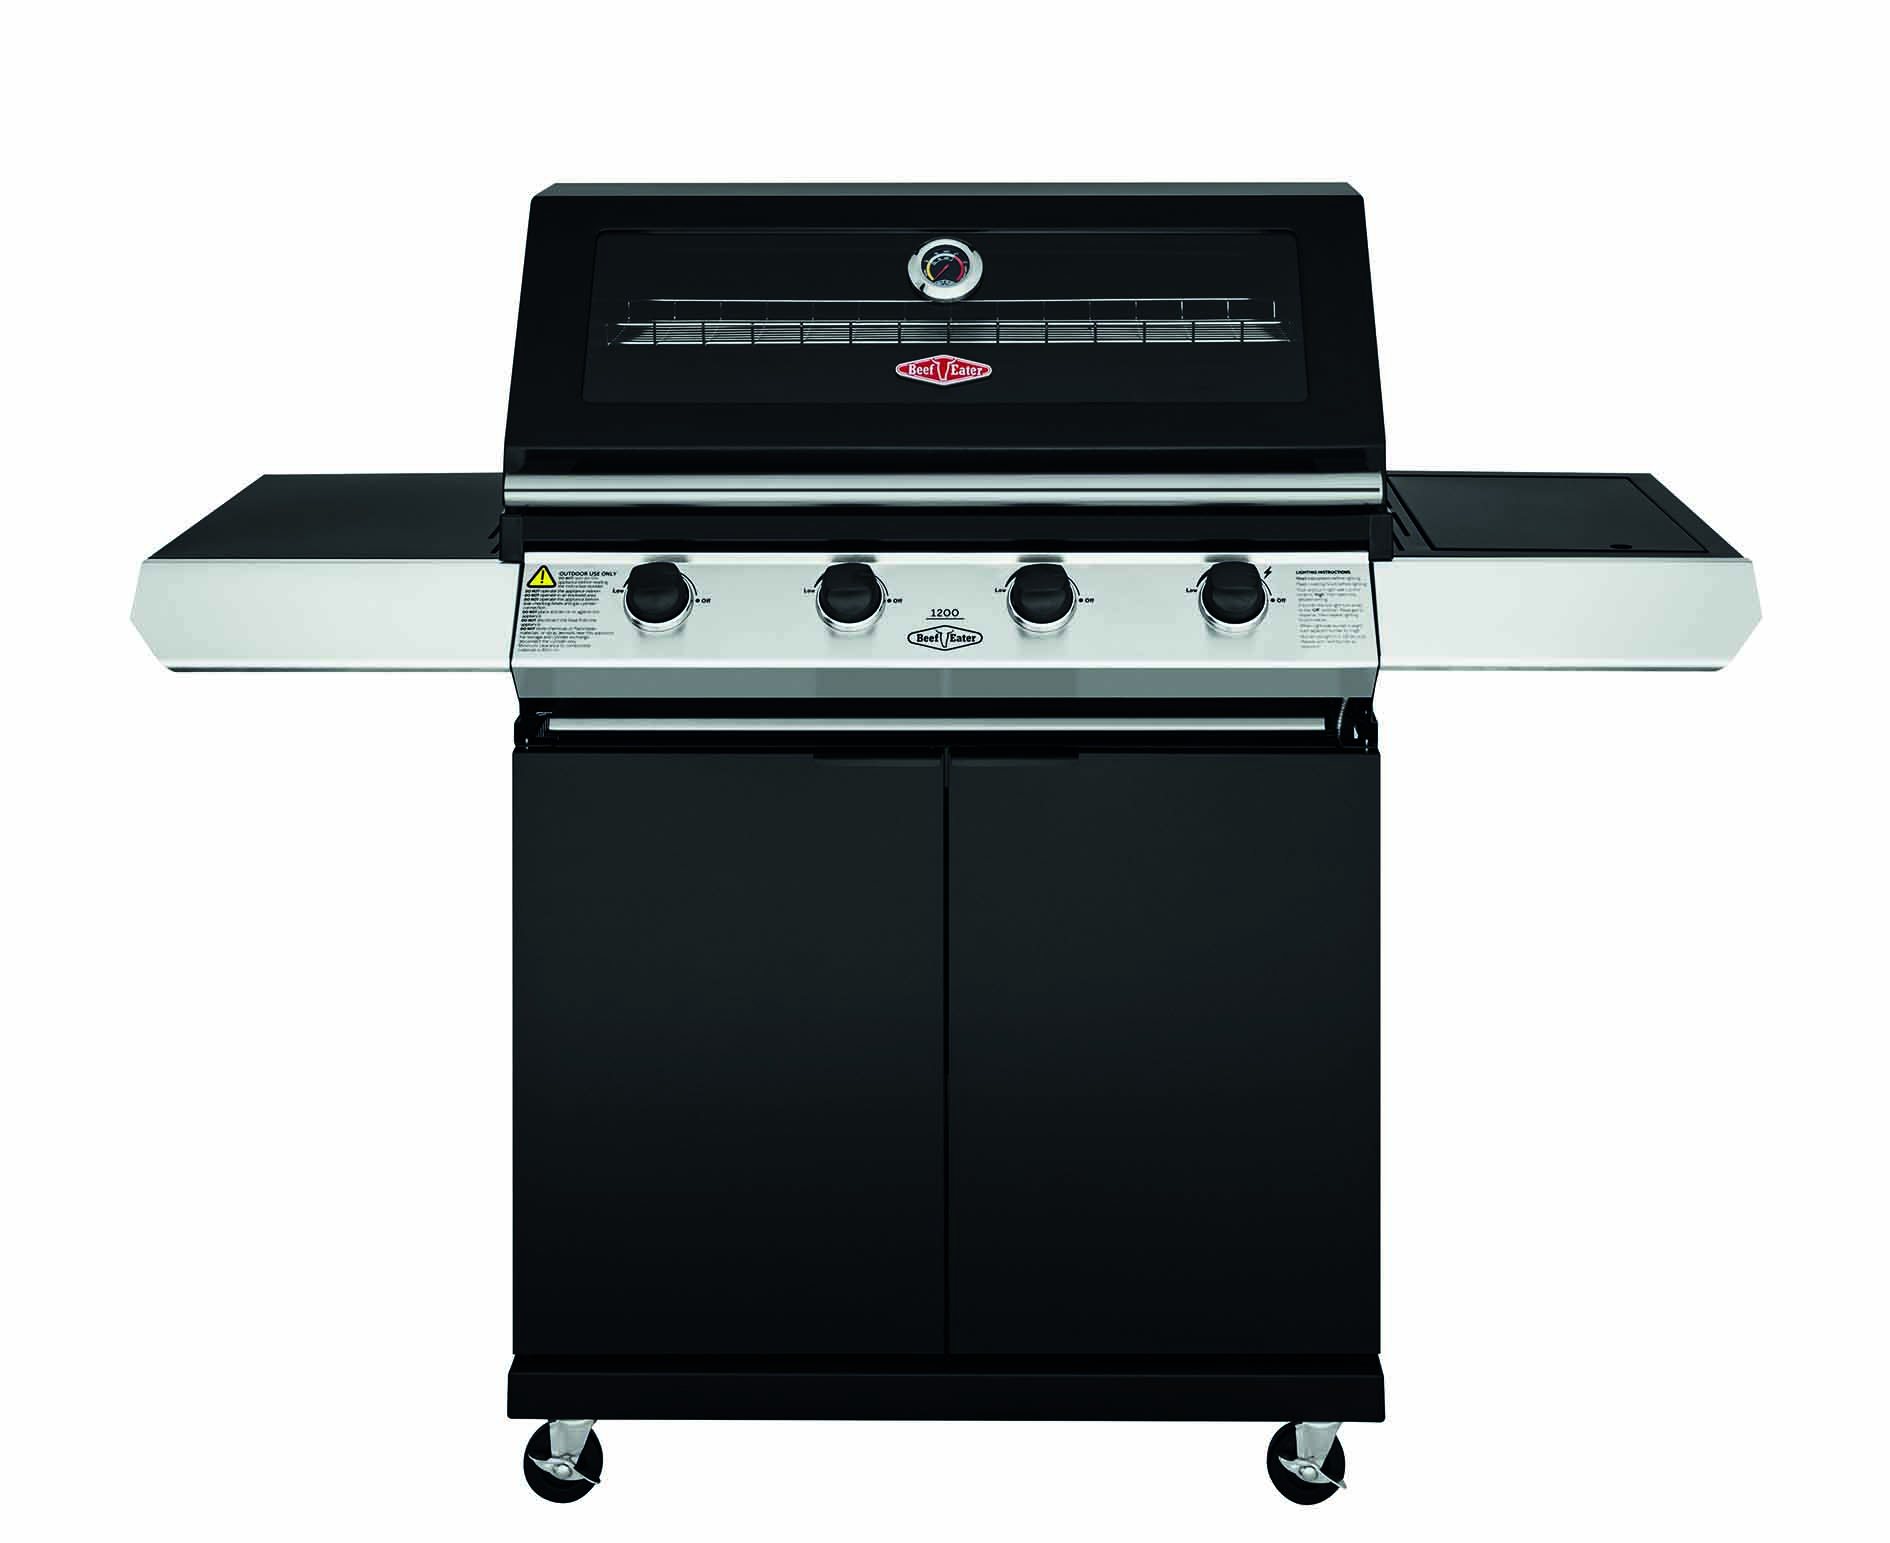 Beefeater 1200E Series - 4 burners black